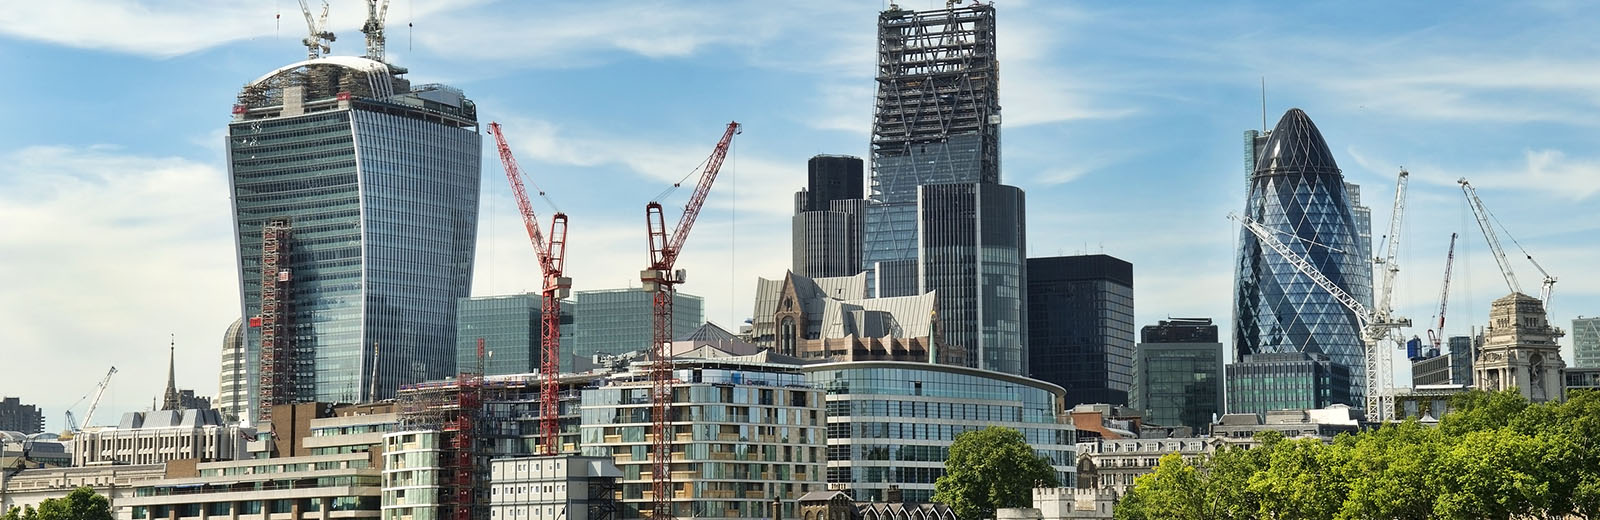 View of London buildings and skyline 